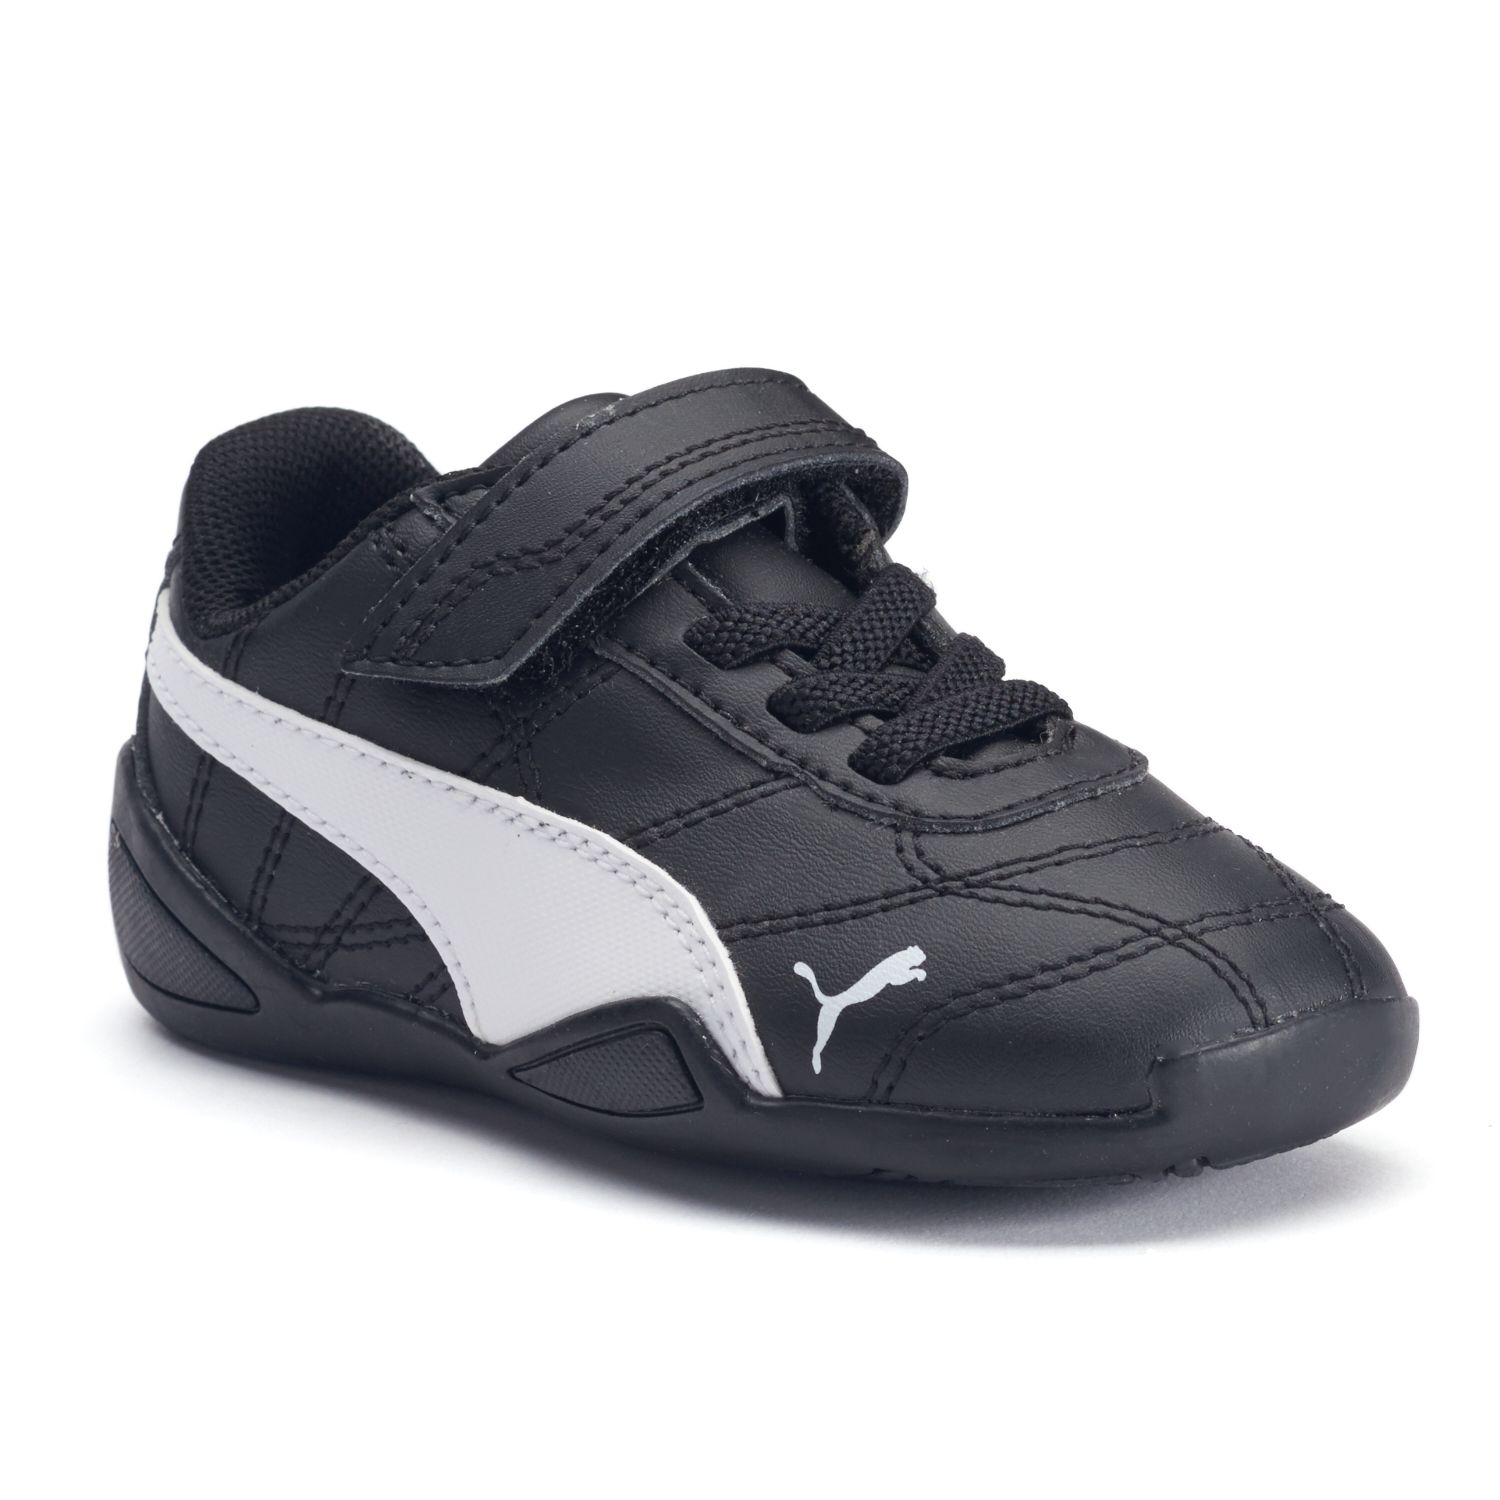 PUMA Tune Cat 3 Toddler Boys' Shoes